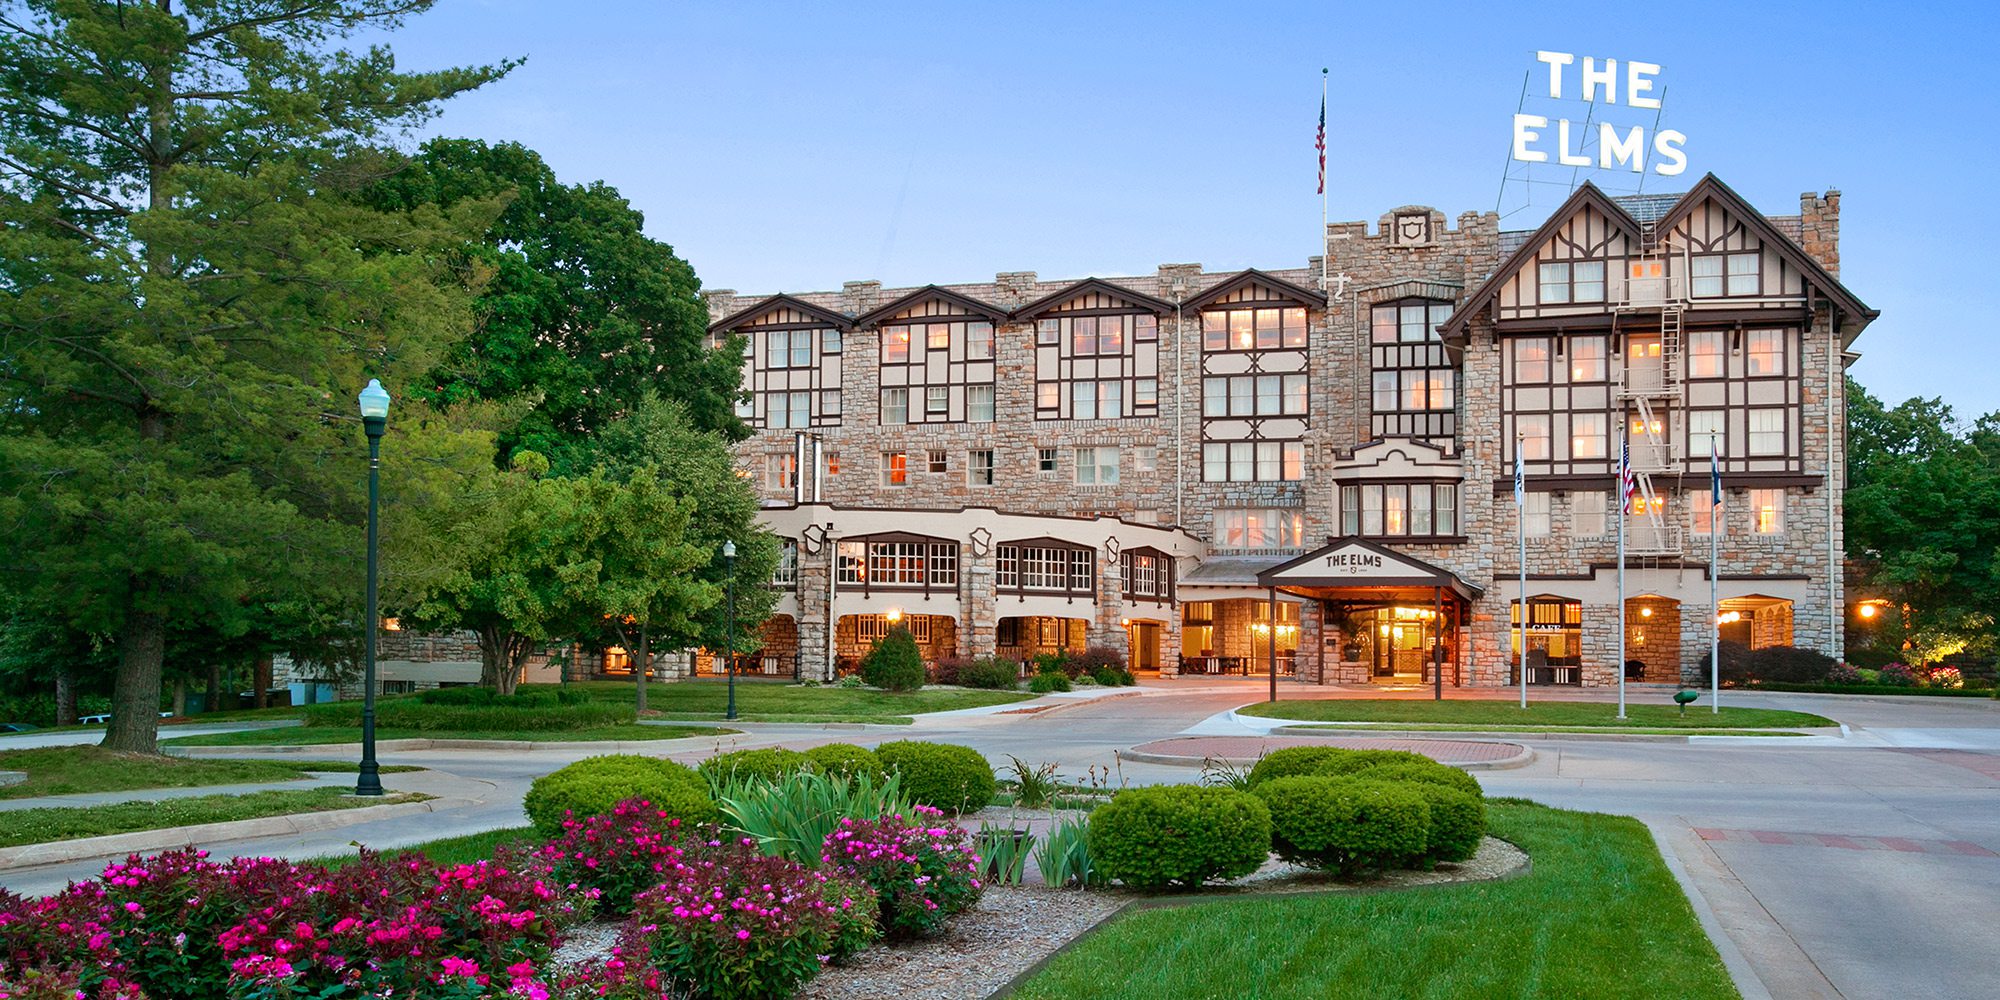 The Elms Hotel in Excelsior Springs, MO